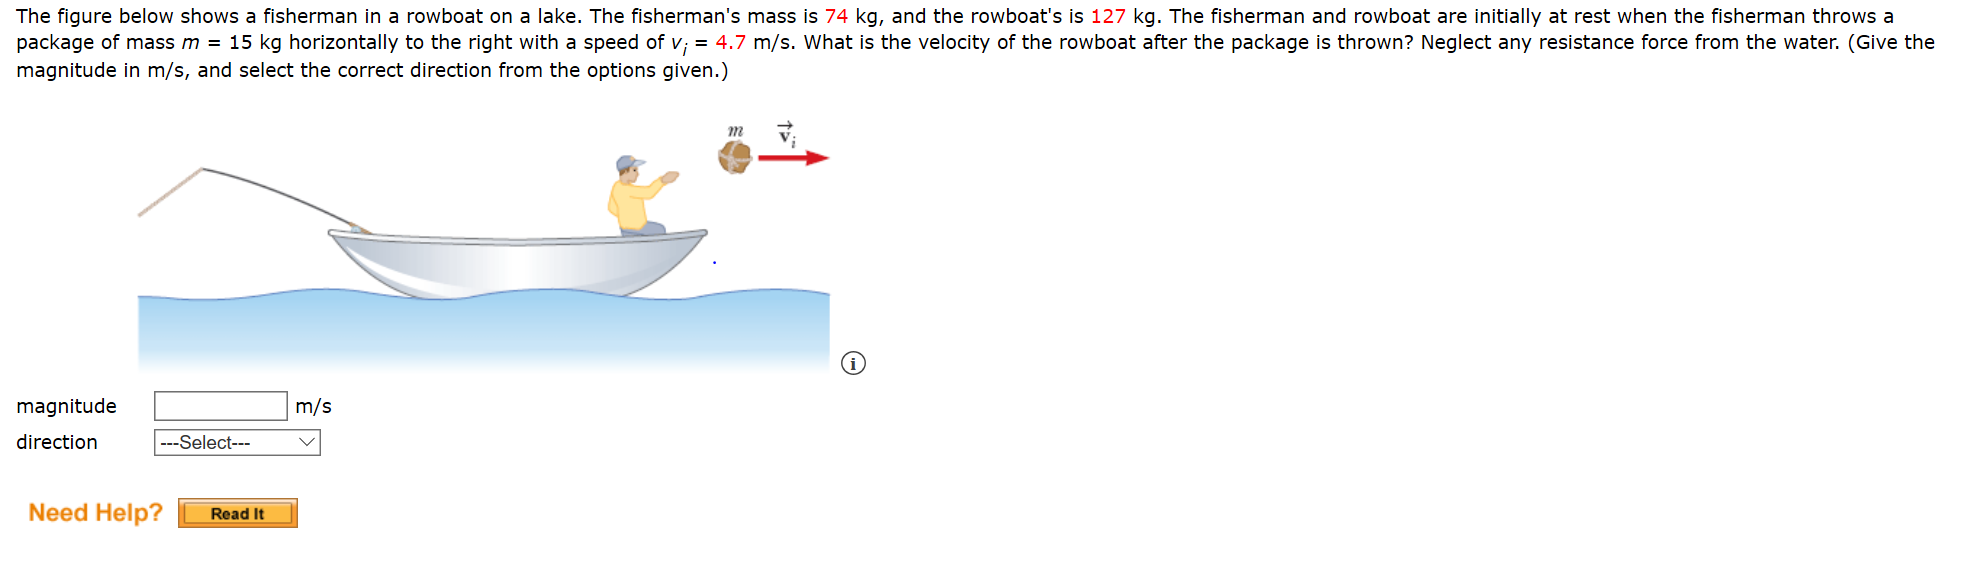 The figure below shows a fisherman in a rowboat on a lake. The fisherman's mass is 74 kg, and the rowboat's is 127 kg. The fisherman and rowboat are initially at rest when the fisherman throws a
package of mass m = 15 kg horizontally to the right with a speed of v; = 4.7 m/s. What is the velocity of the rowboat after the package is thrown? Neglect any resistance force from the water. (Give the
magnitude in m/s, and select the correct direction from the options given.)
